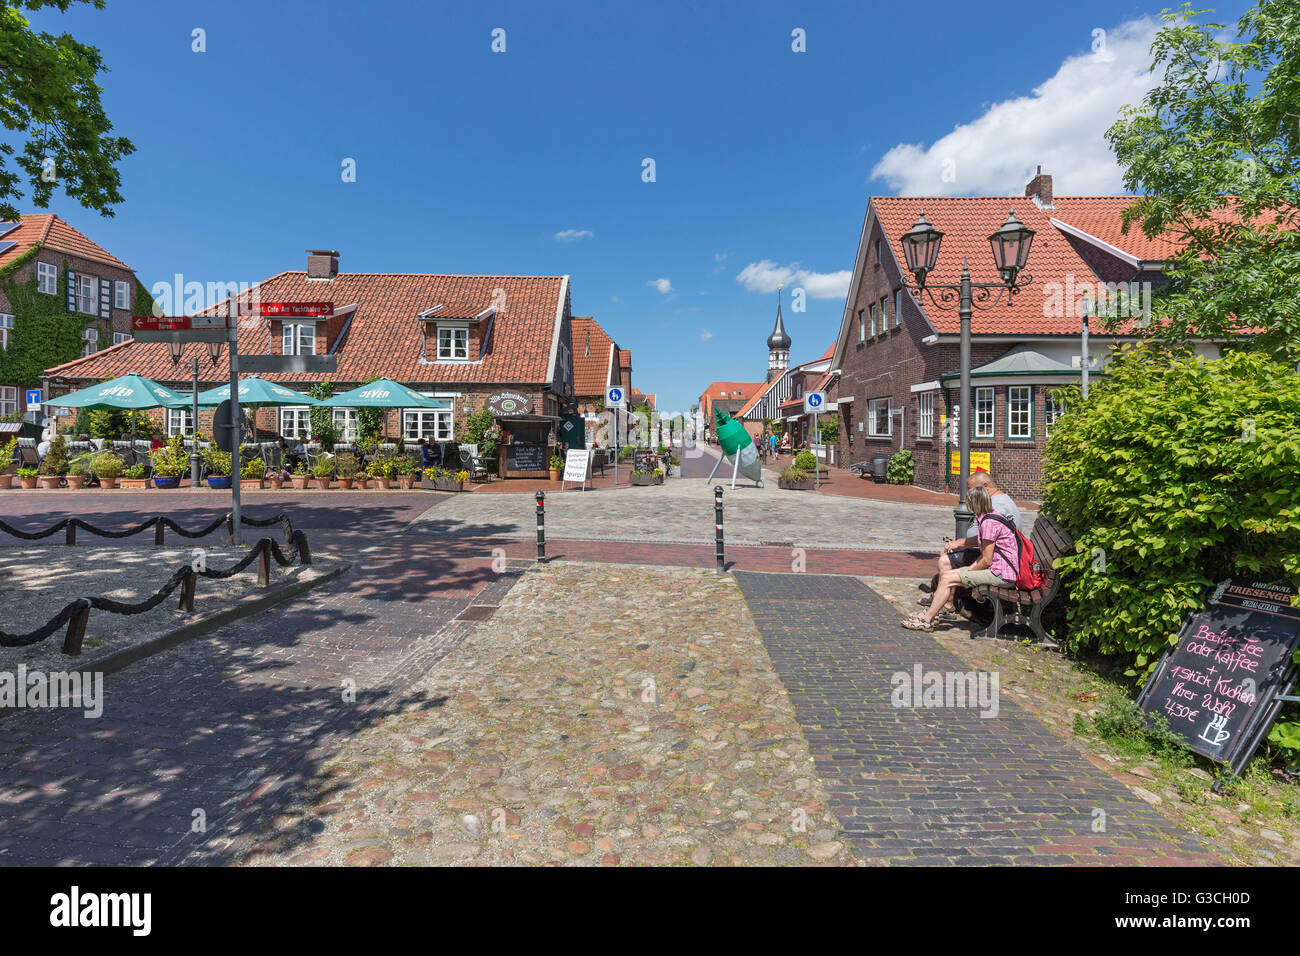 Center of Hooksiel, district of the municipality Wangerland, district of Friesland, Stock Photo